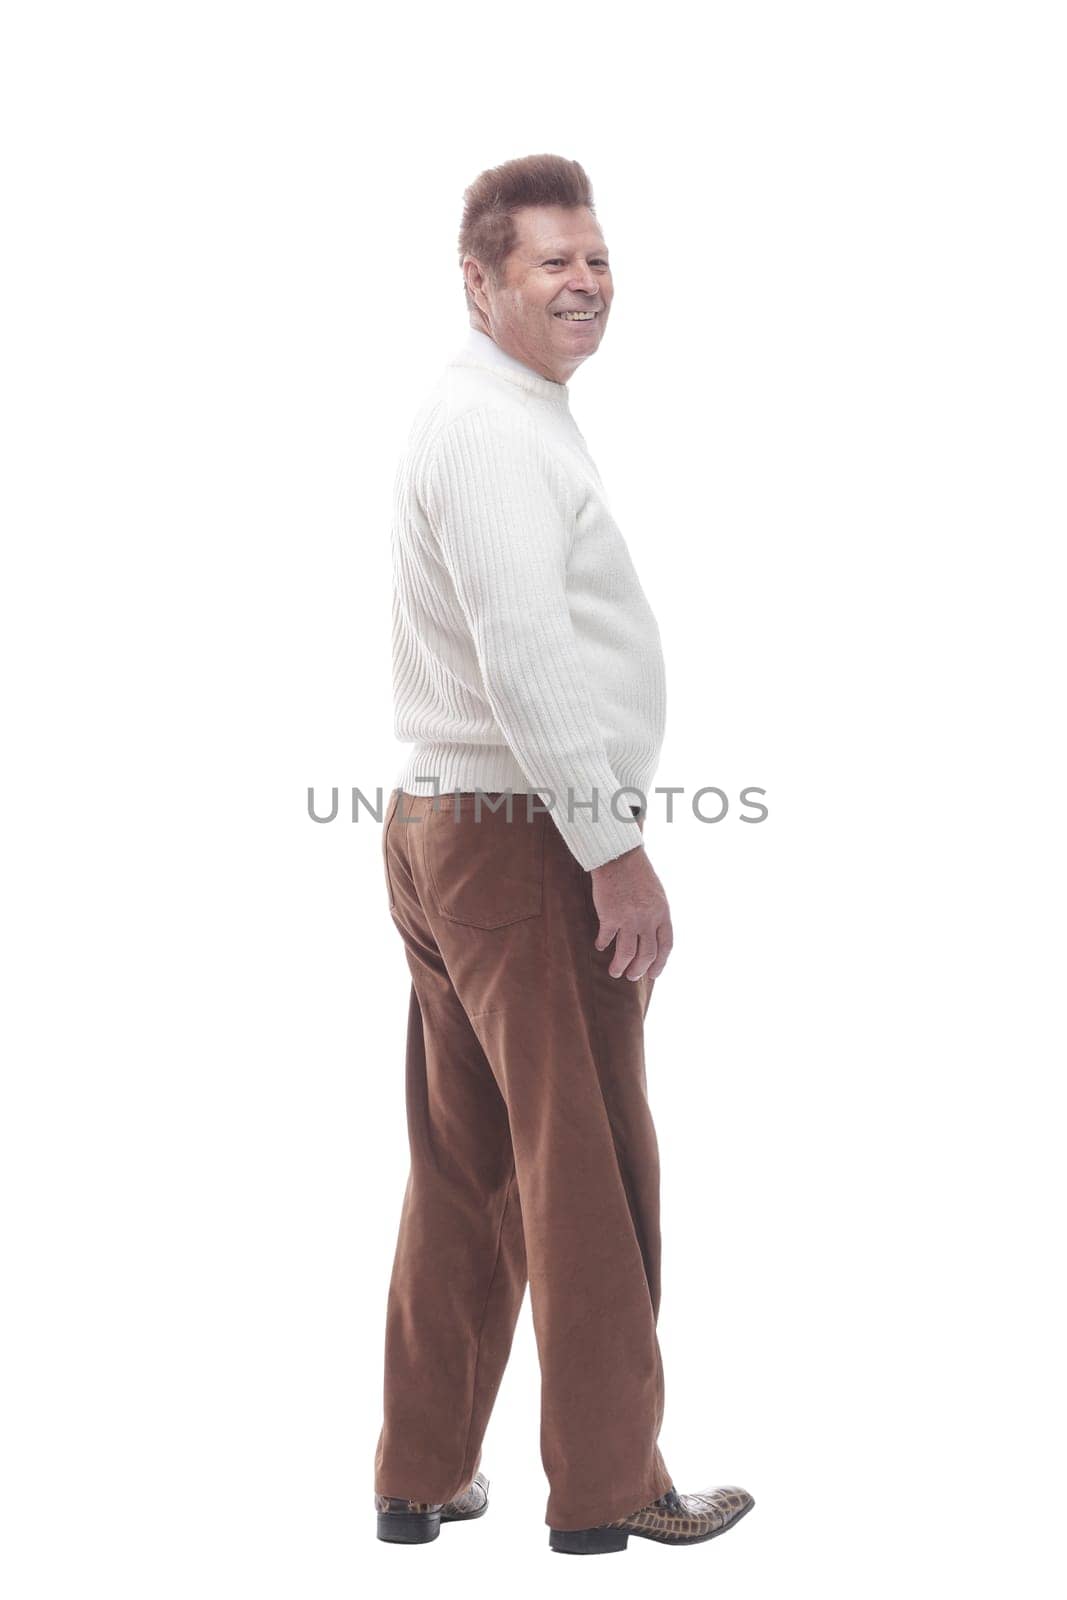 rear view. adult casual male looking at blank screen . isolated on a white